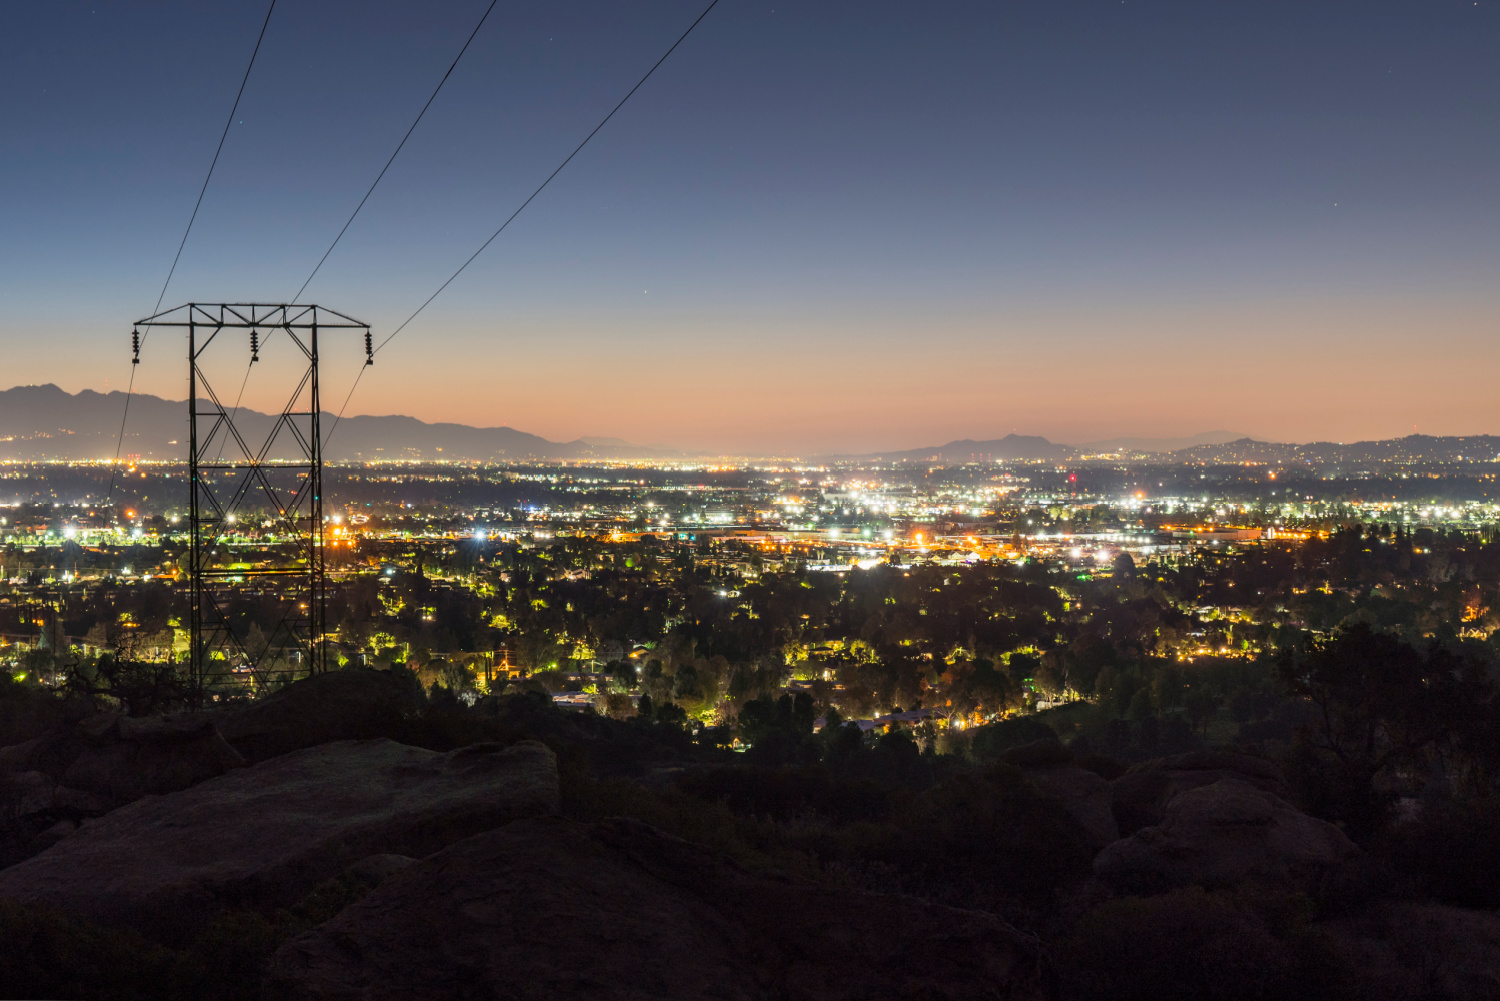 Power lines light up San Fernando valley in California, but carry great danger.